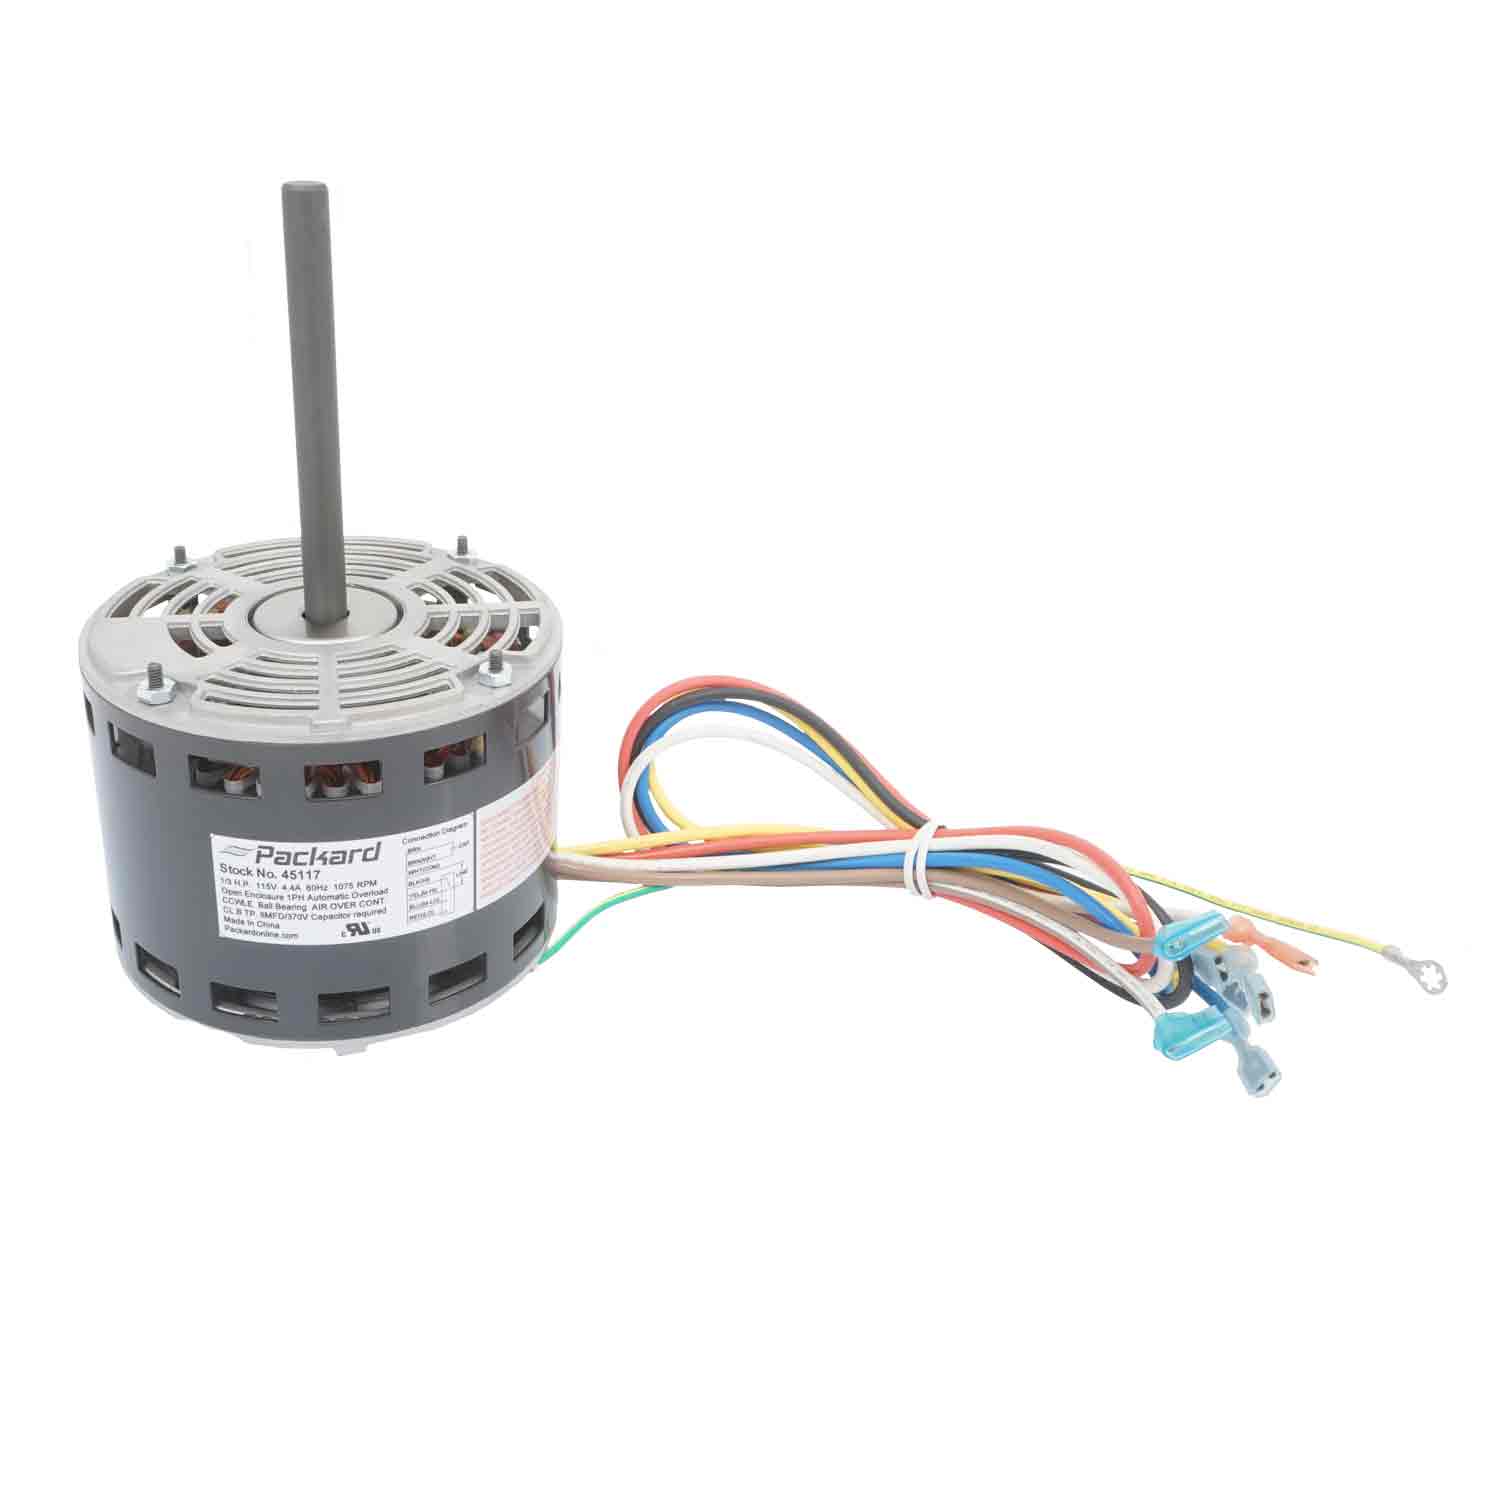 1/3 HP 1075 RPM 115V PSC Motor replaces Carrier